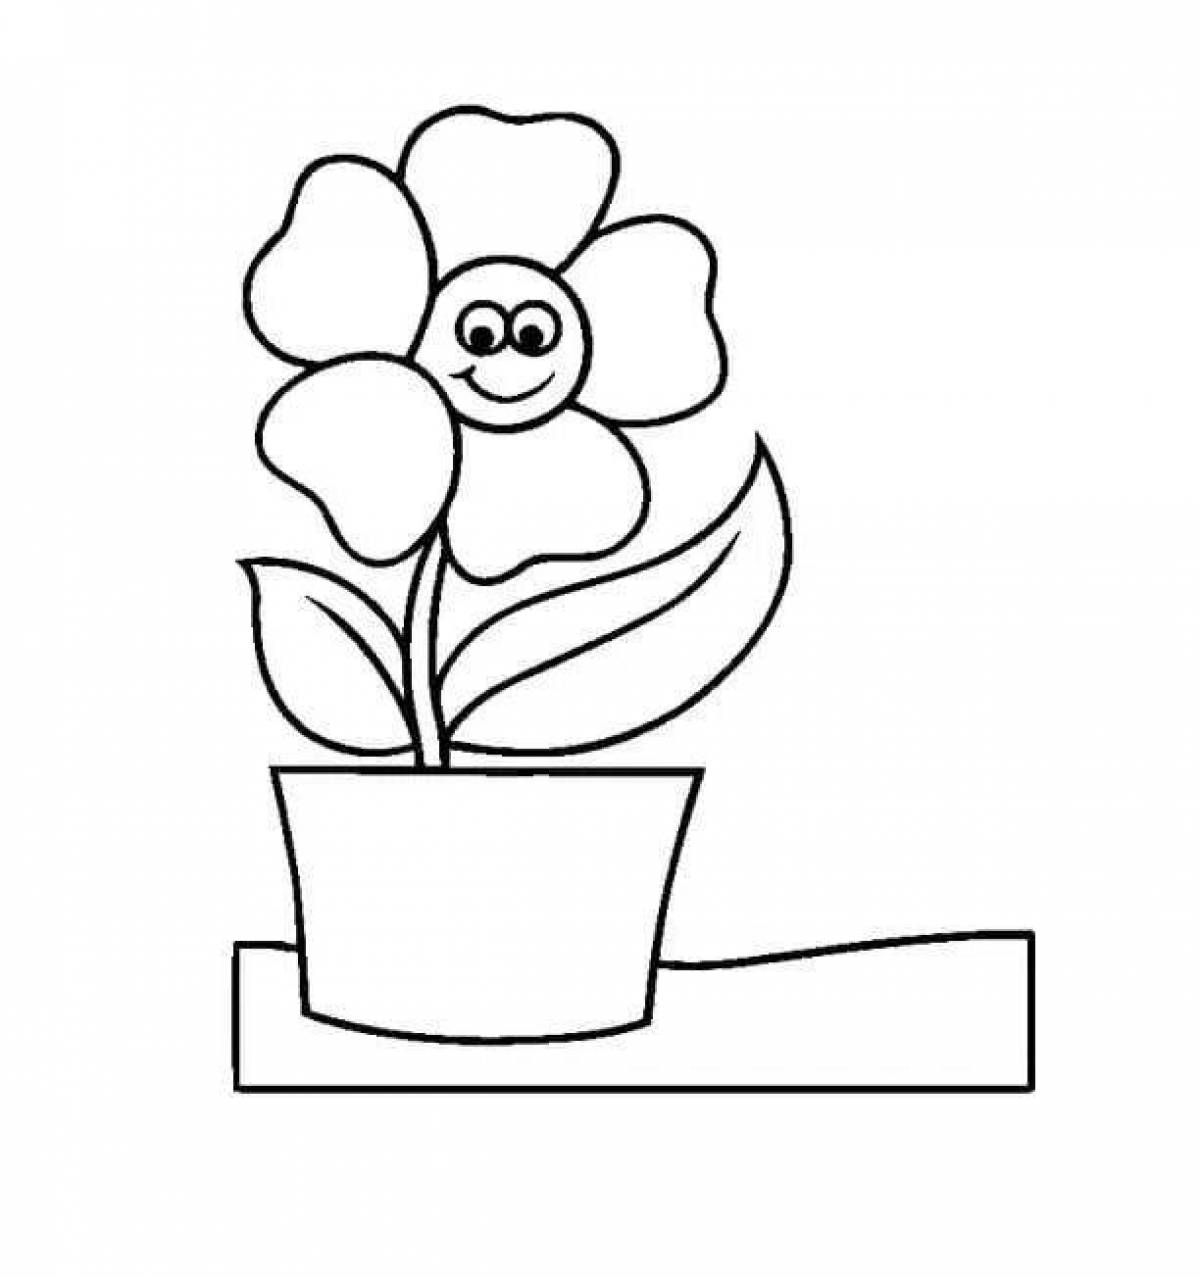 Colouring awesome flower pot